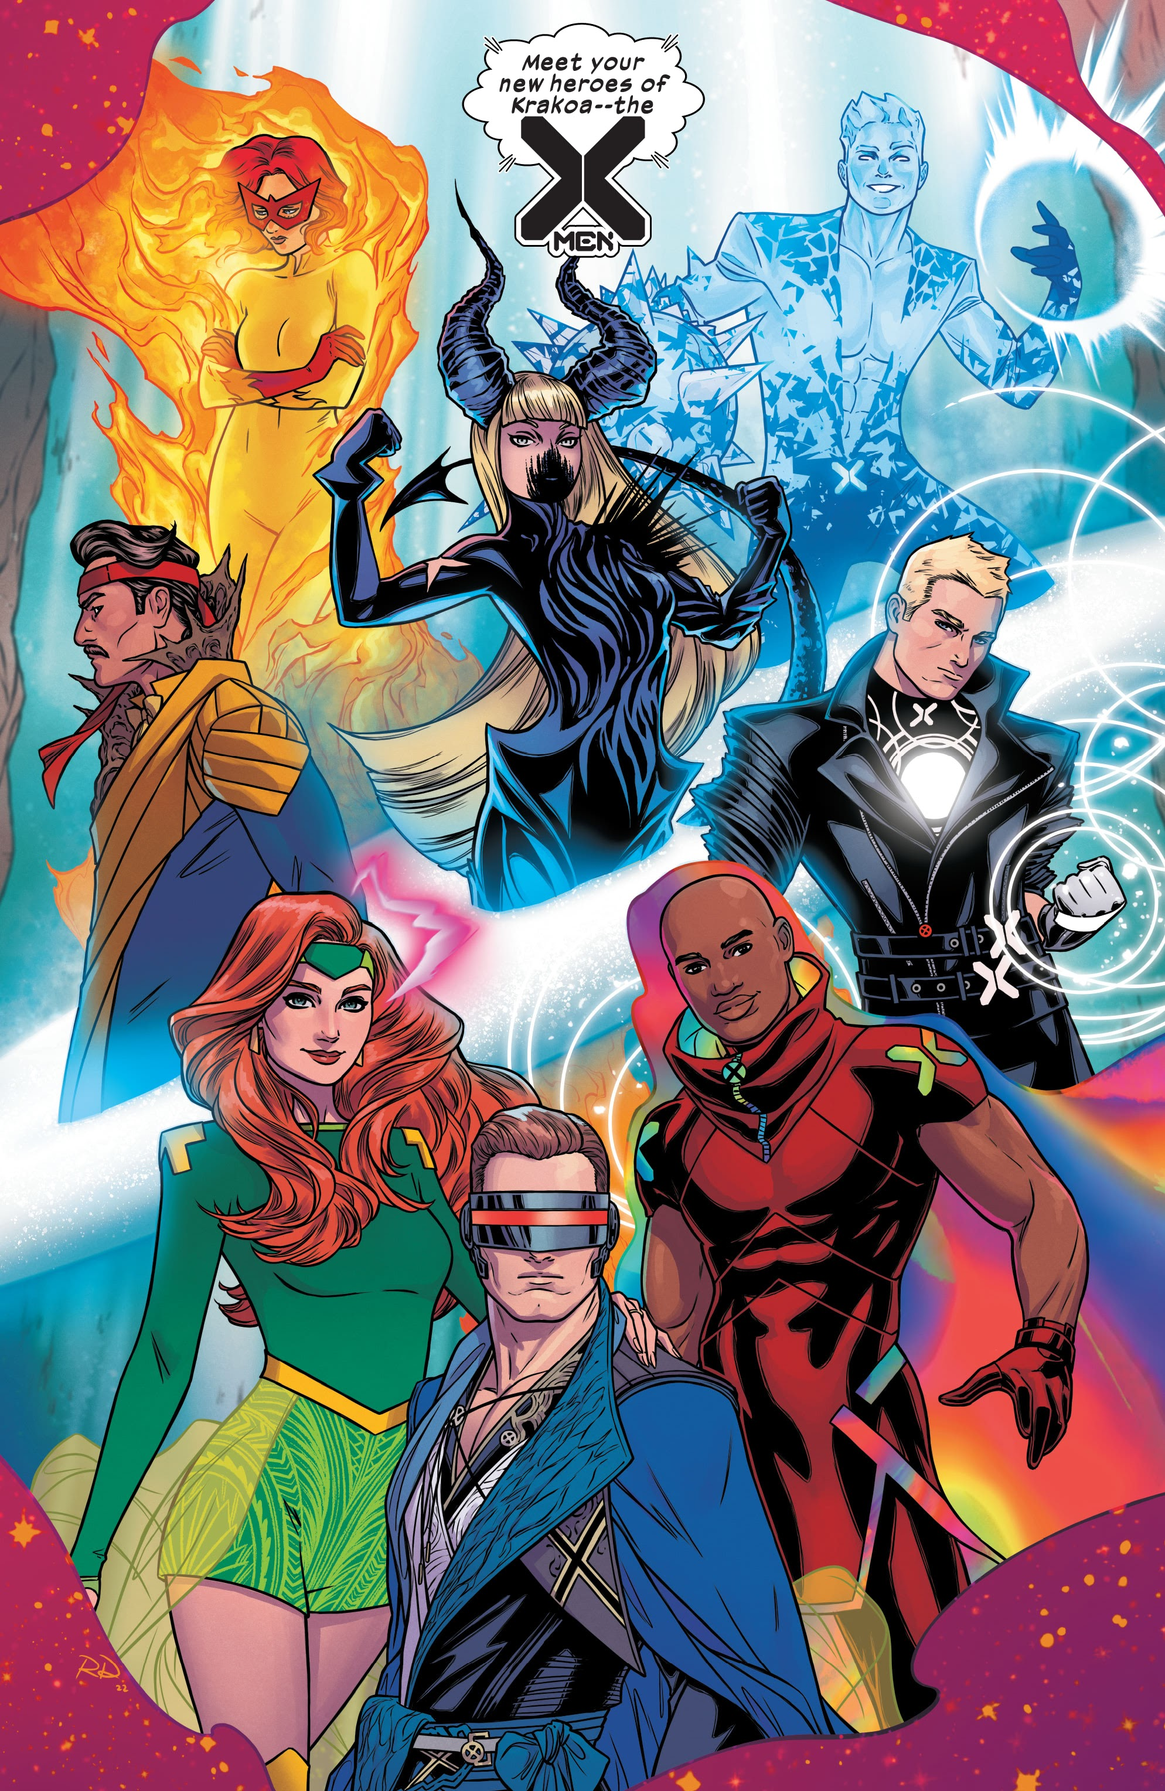 To us, our X-Men of 2022! (Image: Russell Dautermann/Marvel Comics)